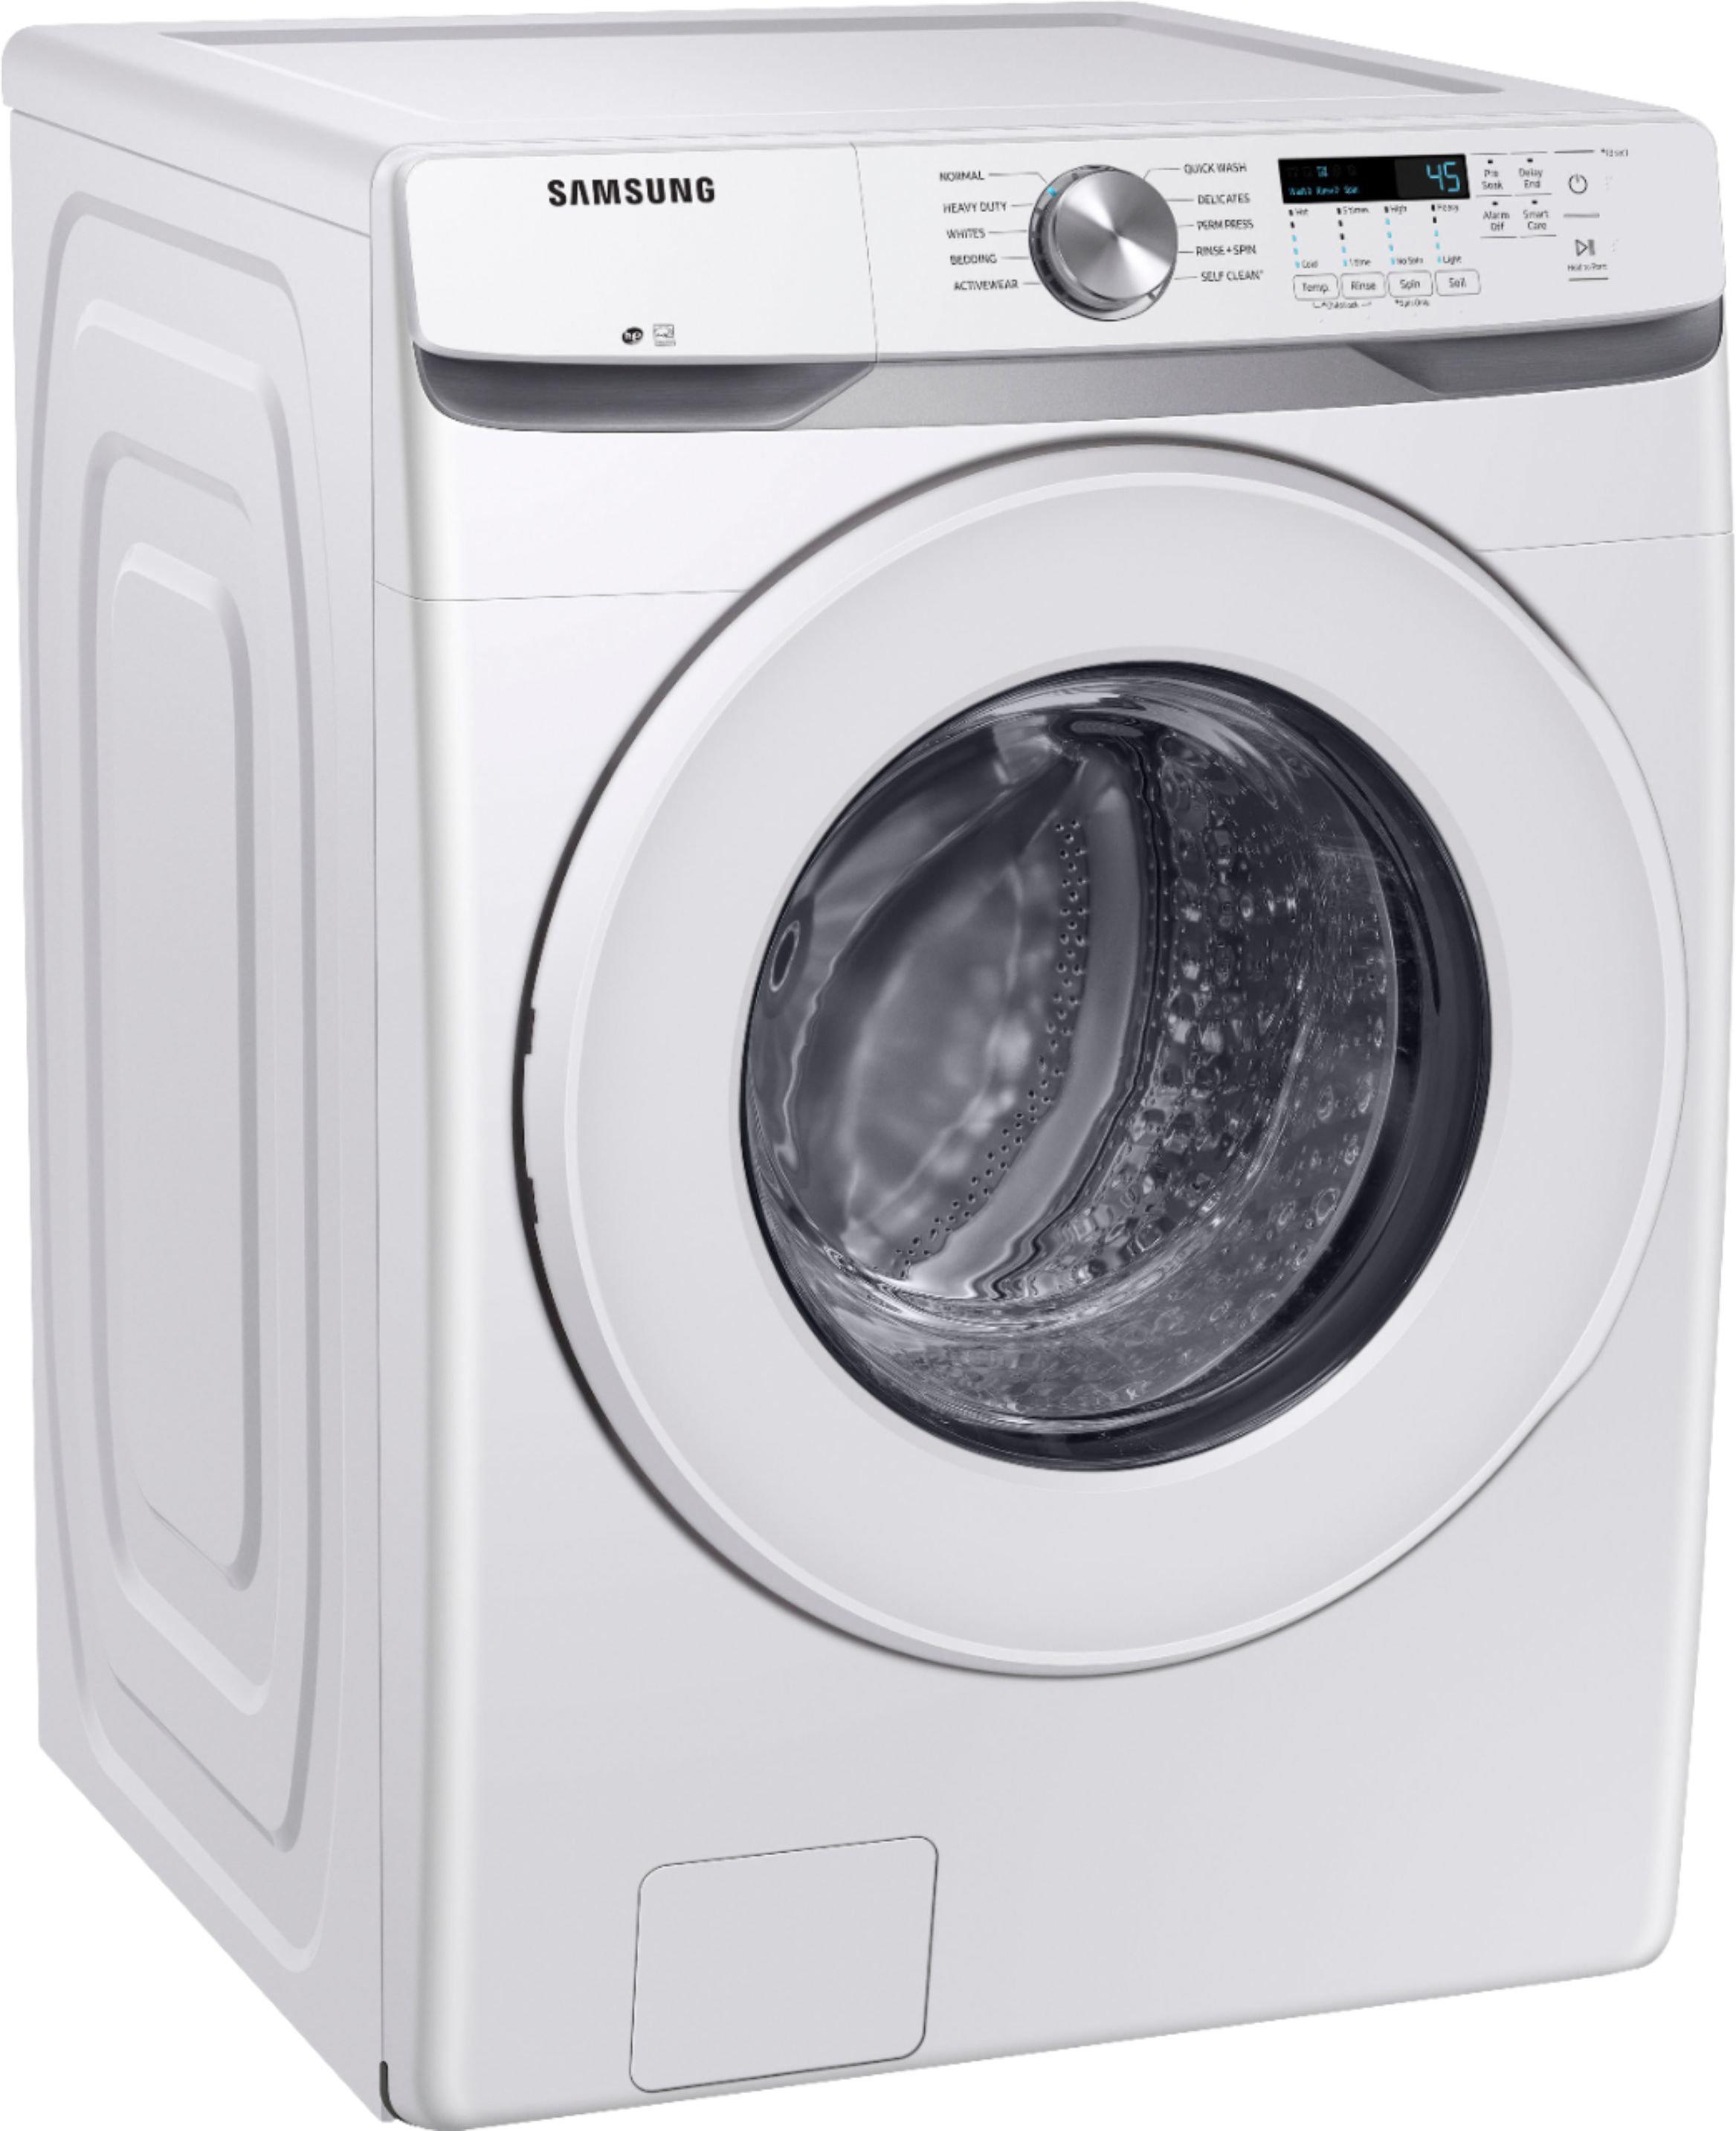 Samsung WF361BVBEWLPR 4.5 CuFt Front Load Electric Washer With 7.5